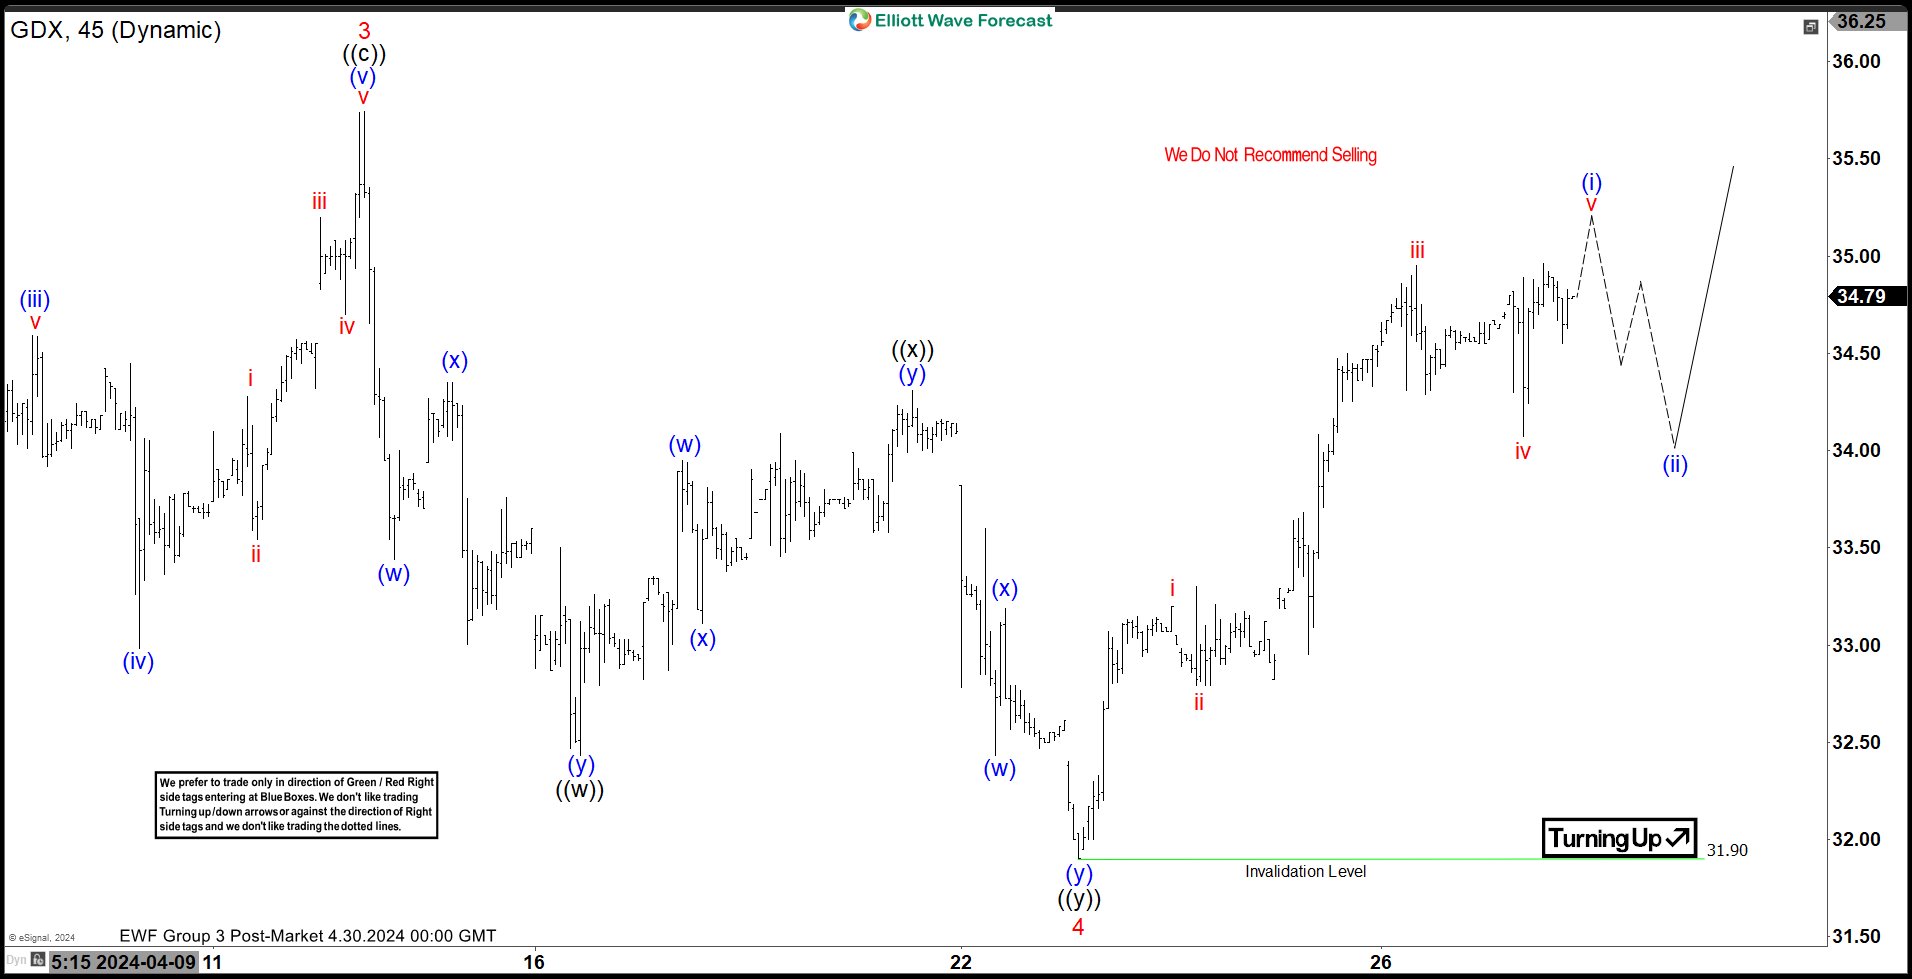 Elliott Wave Intraday Analysis on GDX: Further Rally Expected